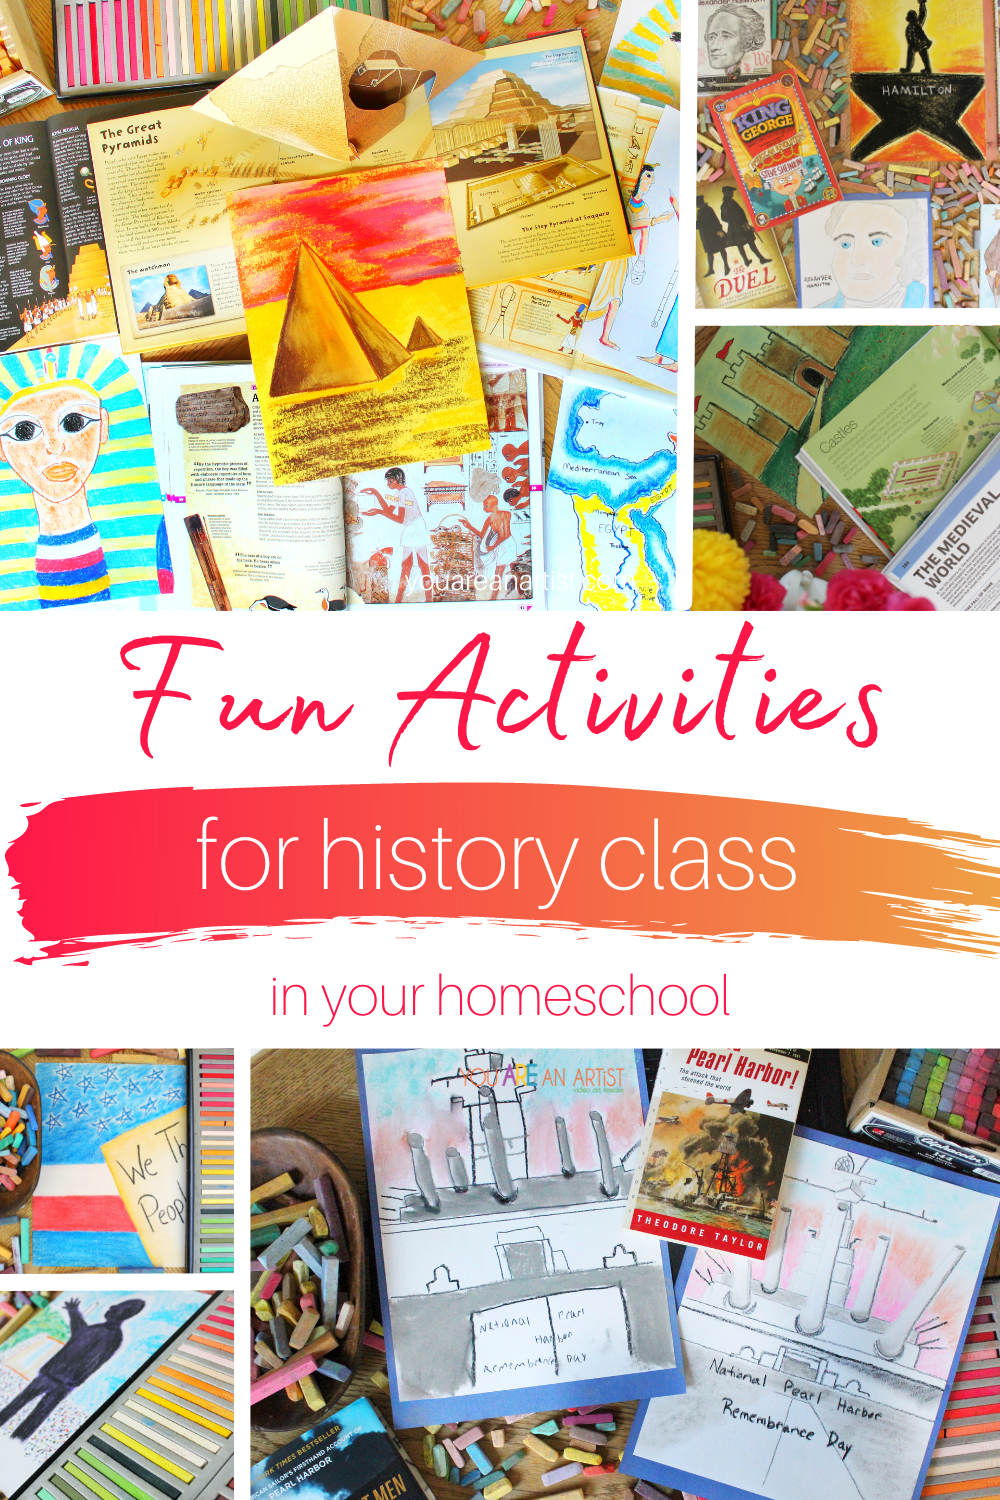 Did you know that history doesn't have to be boring? That's right; you can bring fun activities for history class into your homeschool with these chalk pastel lessons.